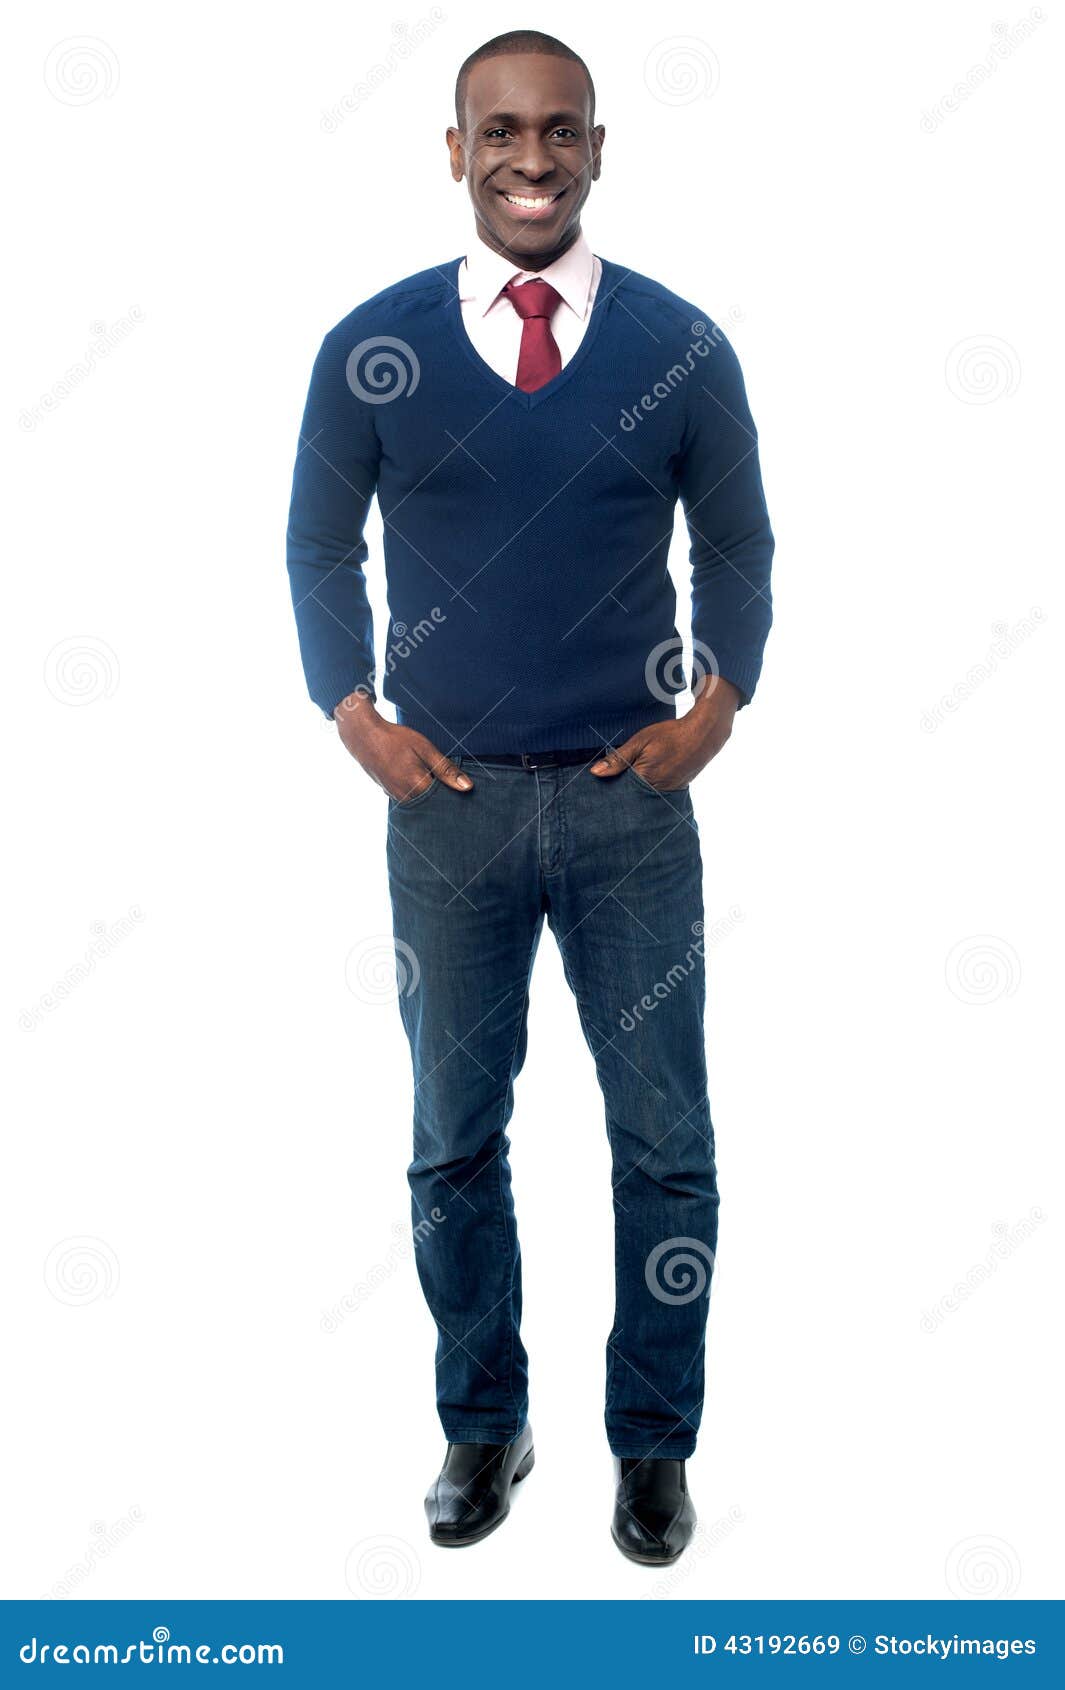 Smiling middle aged businessman posing. Handsome male business executive, hands in pockets